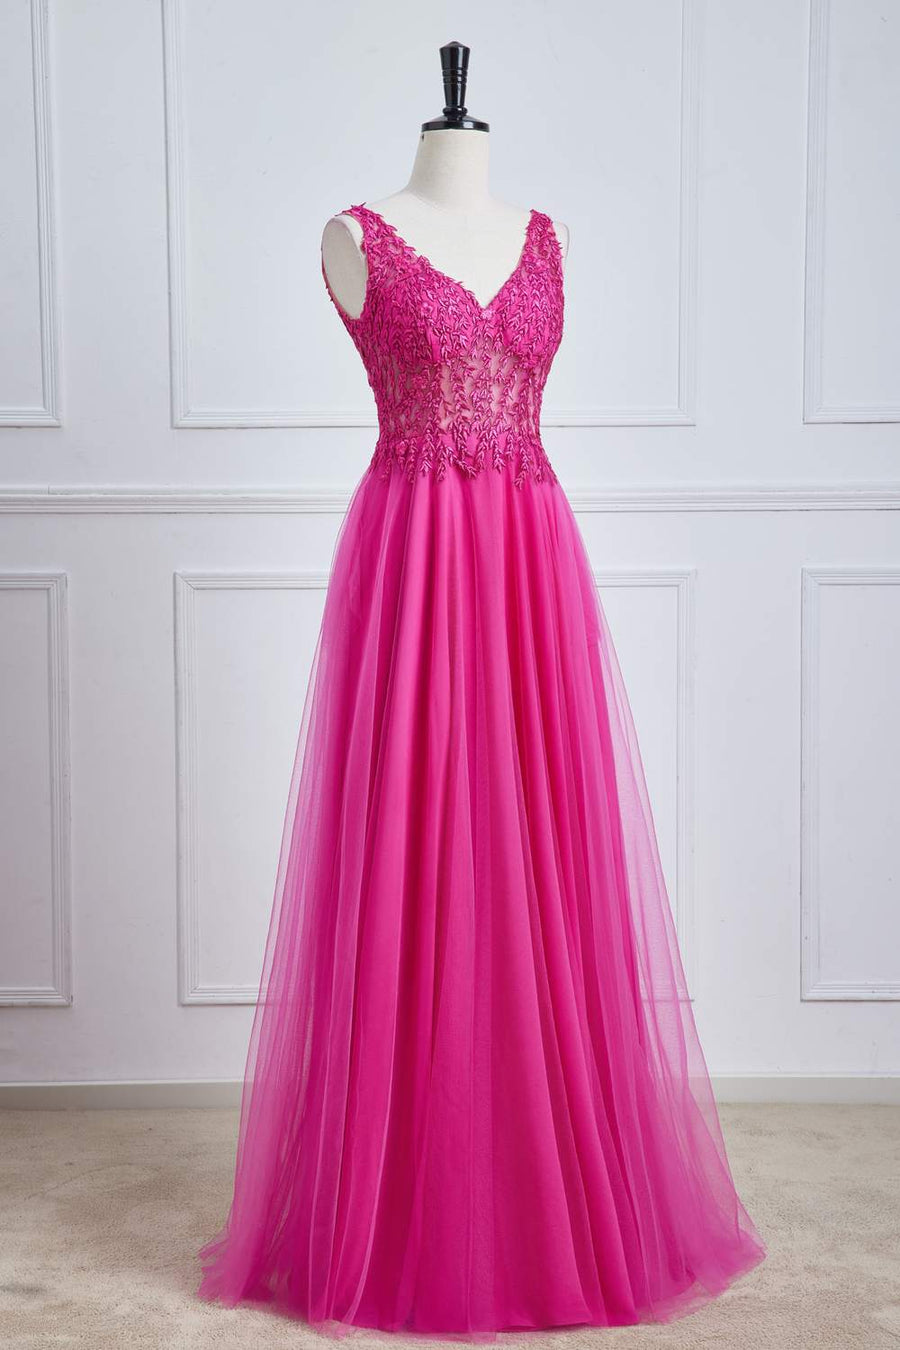 Fuchsia Plunging V Neck Floral A-line Long Prom Dress